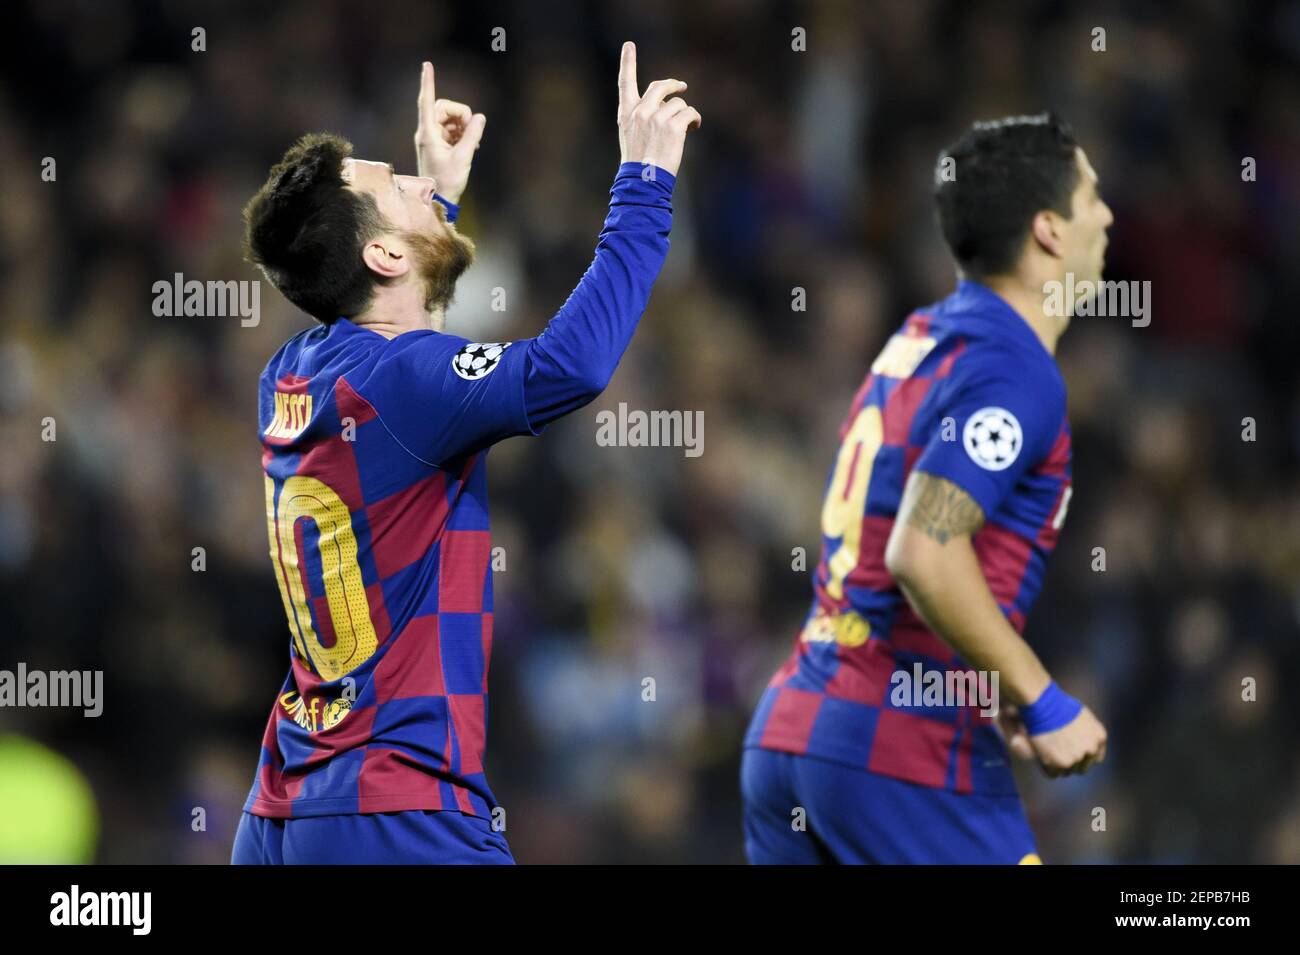 Lionel Messi of Barcelona celebrates scoring during the UEFA Champions League Group F match between FC Barcelona and Borussia Dortmund at Camp Nou Stadium in Barcelona, Spain on November 27, 2019 (Photo by Andrew Surma / SIPA USA) Stock Photo